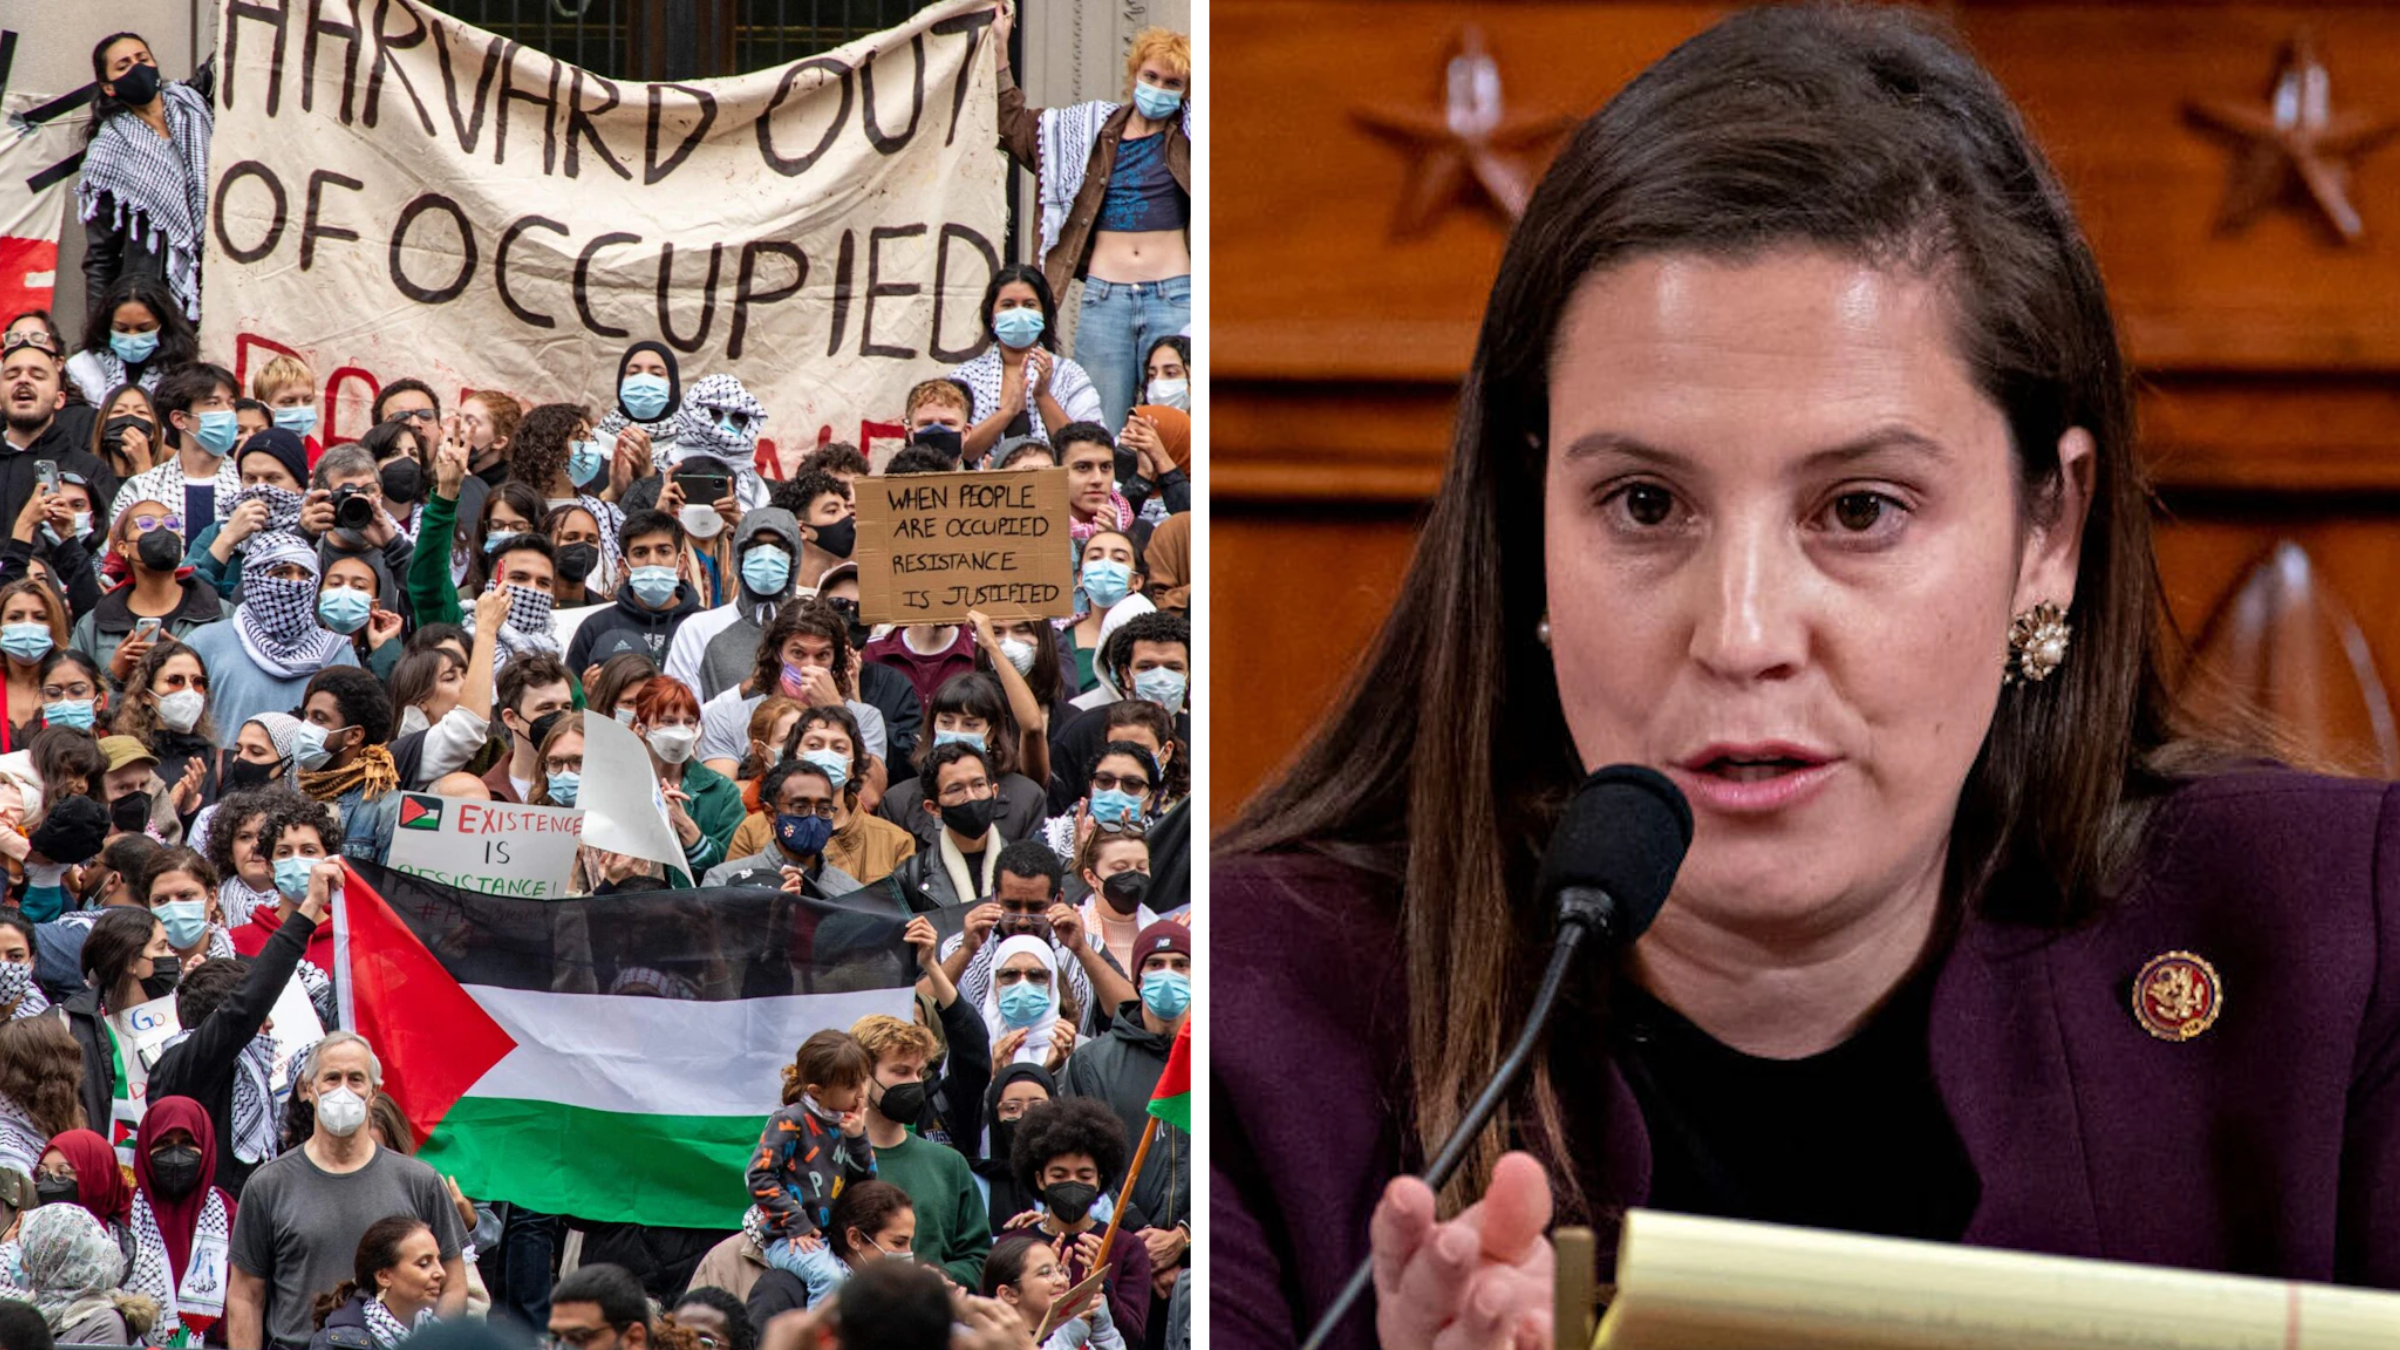 Elise Stefanik criticizes Harvard for supporting anti-Semitic views in a strong letter